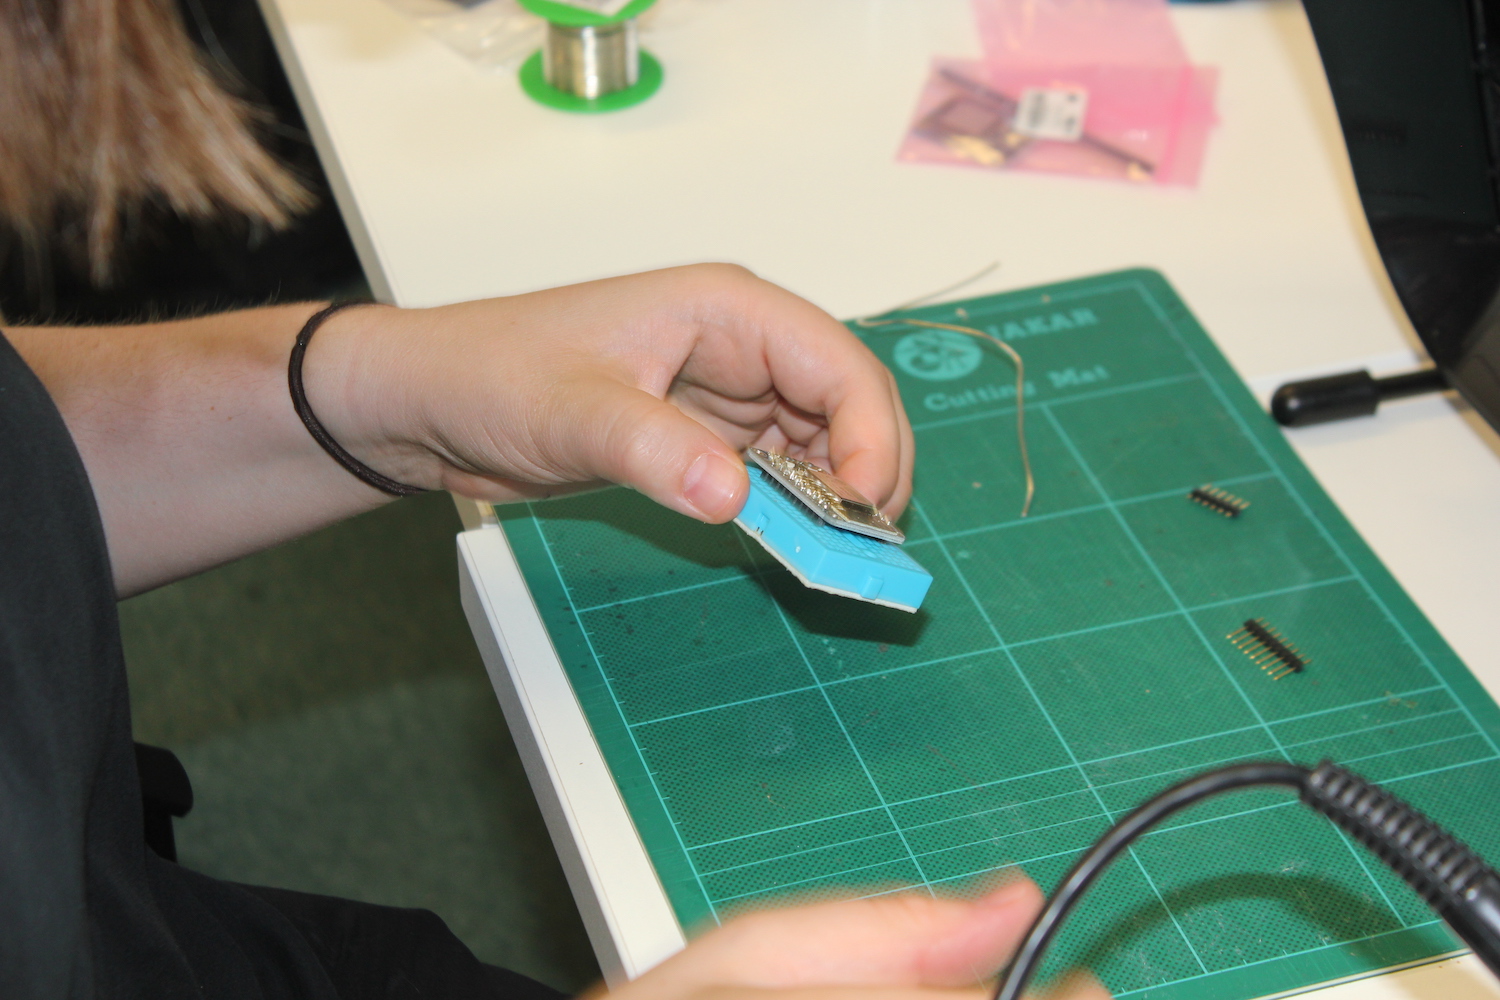 A researcher holds a small breadboard containing the Adafruit Huzzah ESP8266 Breakout to pin headers in one hand as she prepares to solder